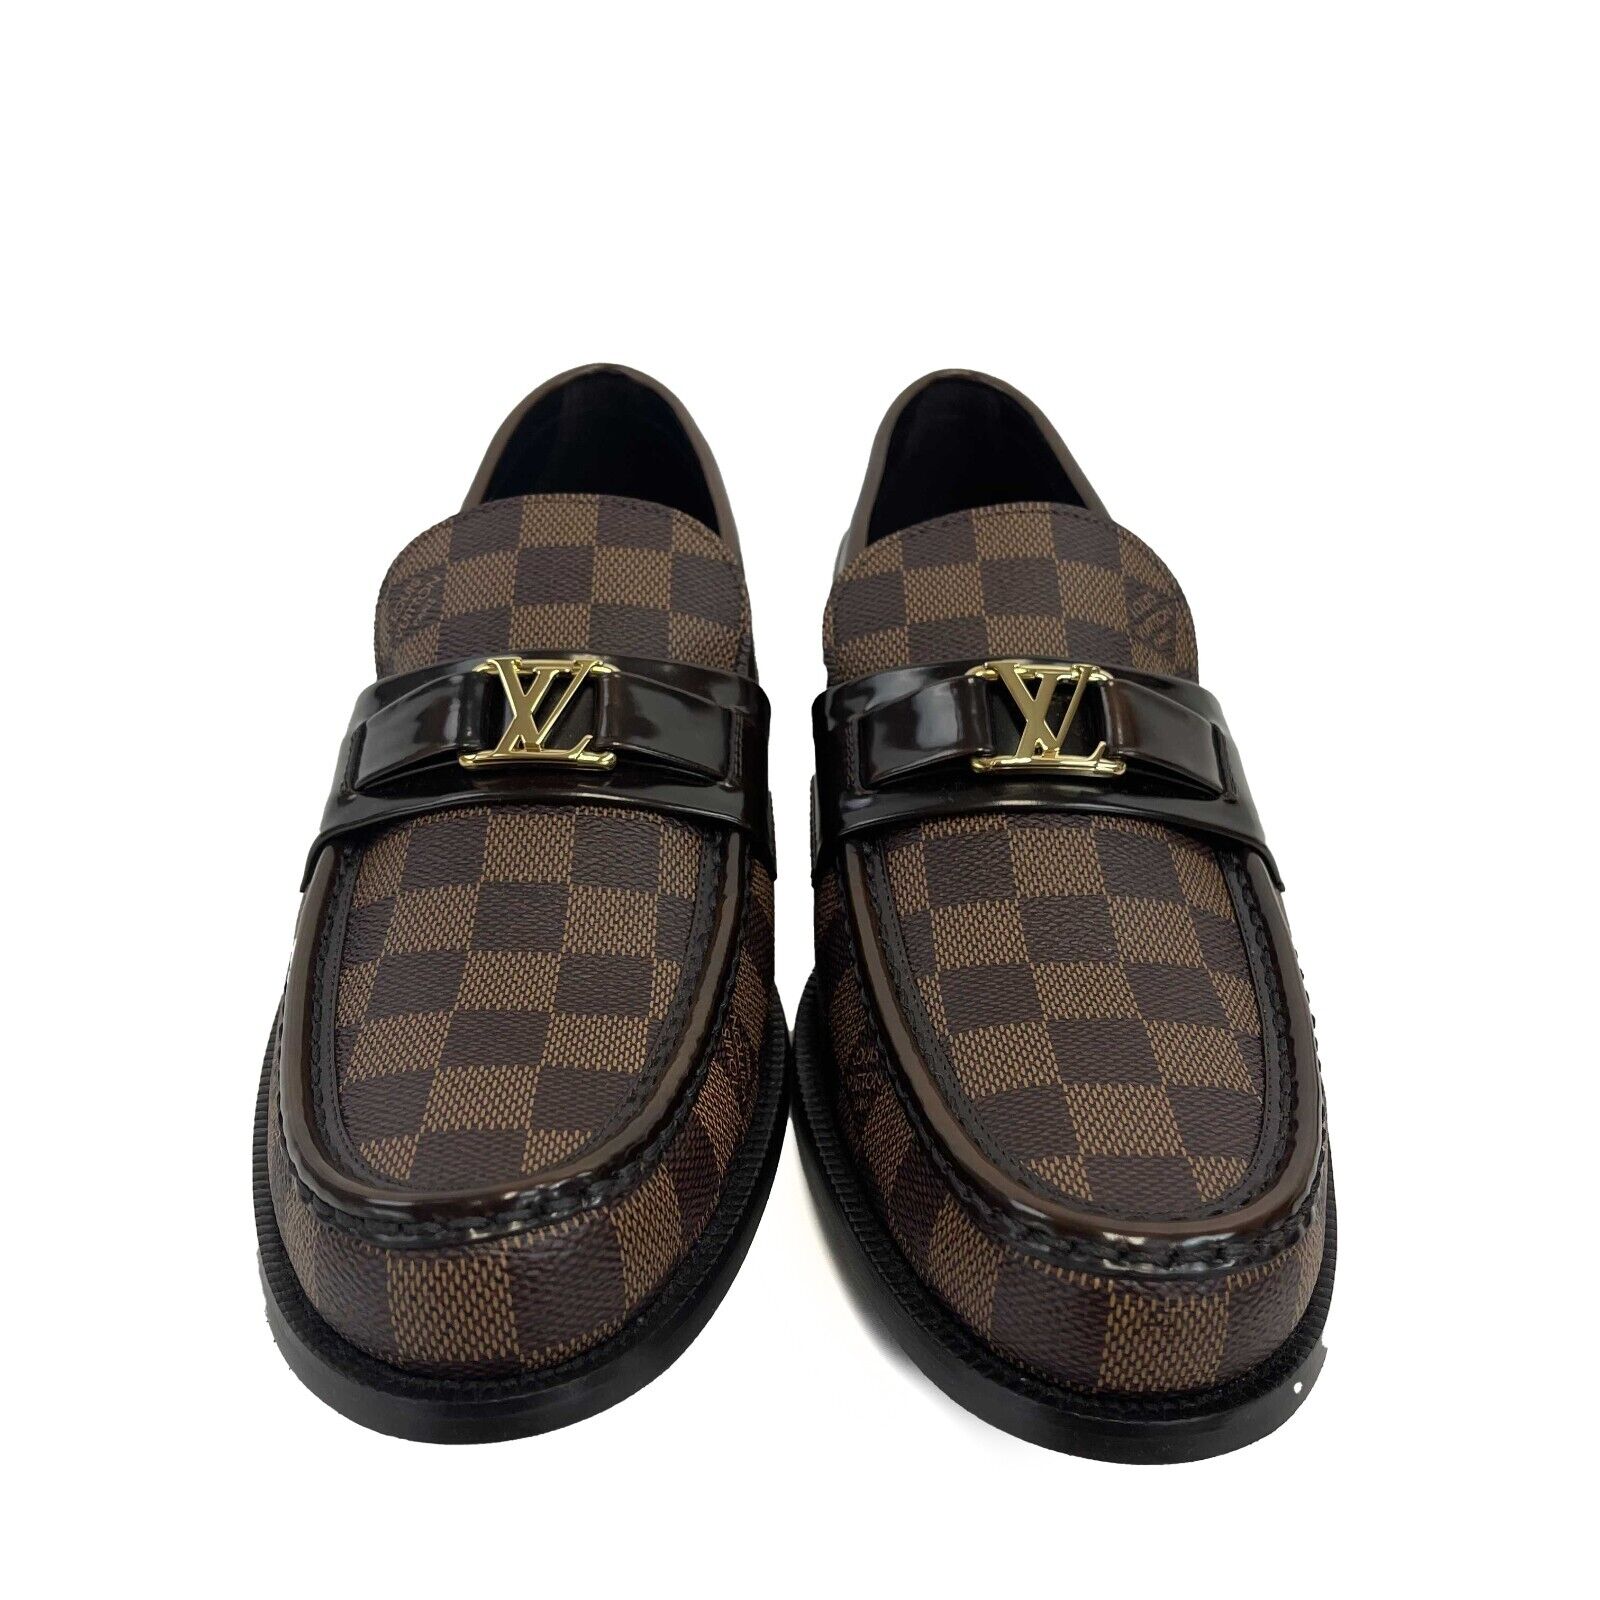 Louis Vuitton - New w/o Tags - Major Loafer in Ebene - Brown